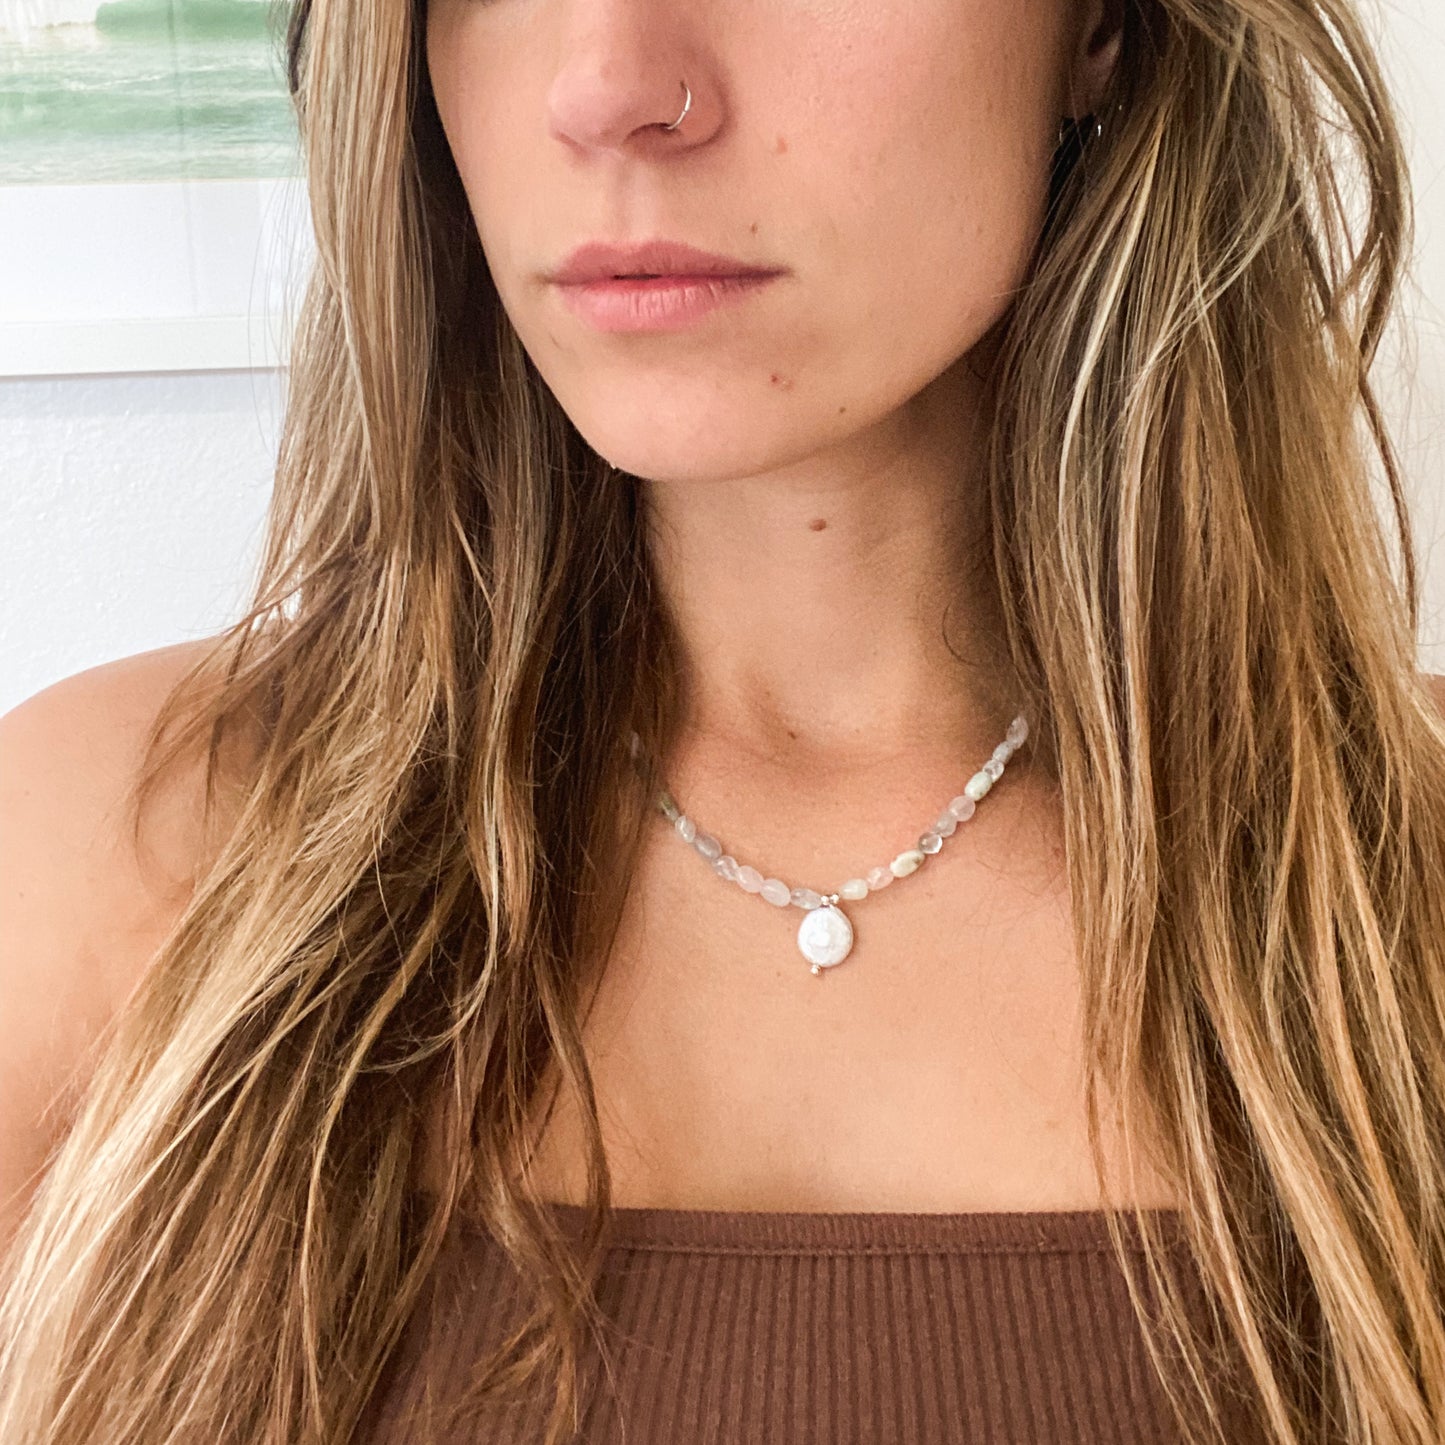 Tully necklace - Beryl + Fresh Water Pearl